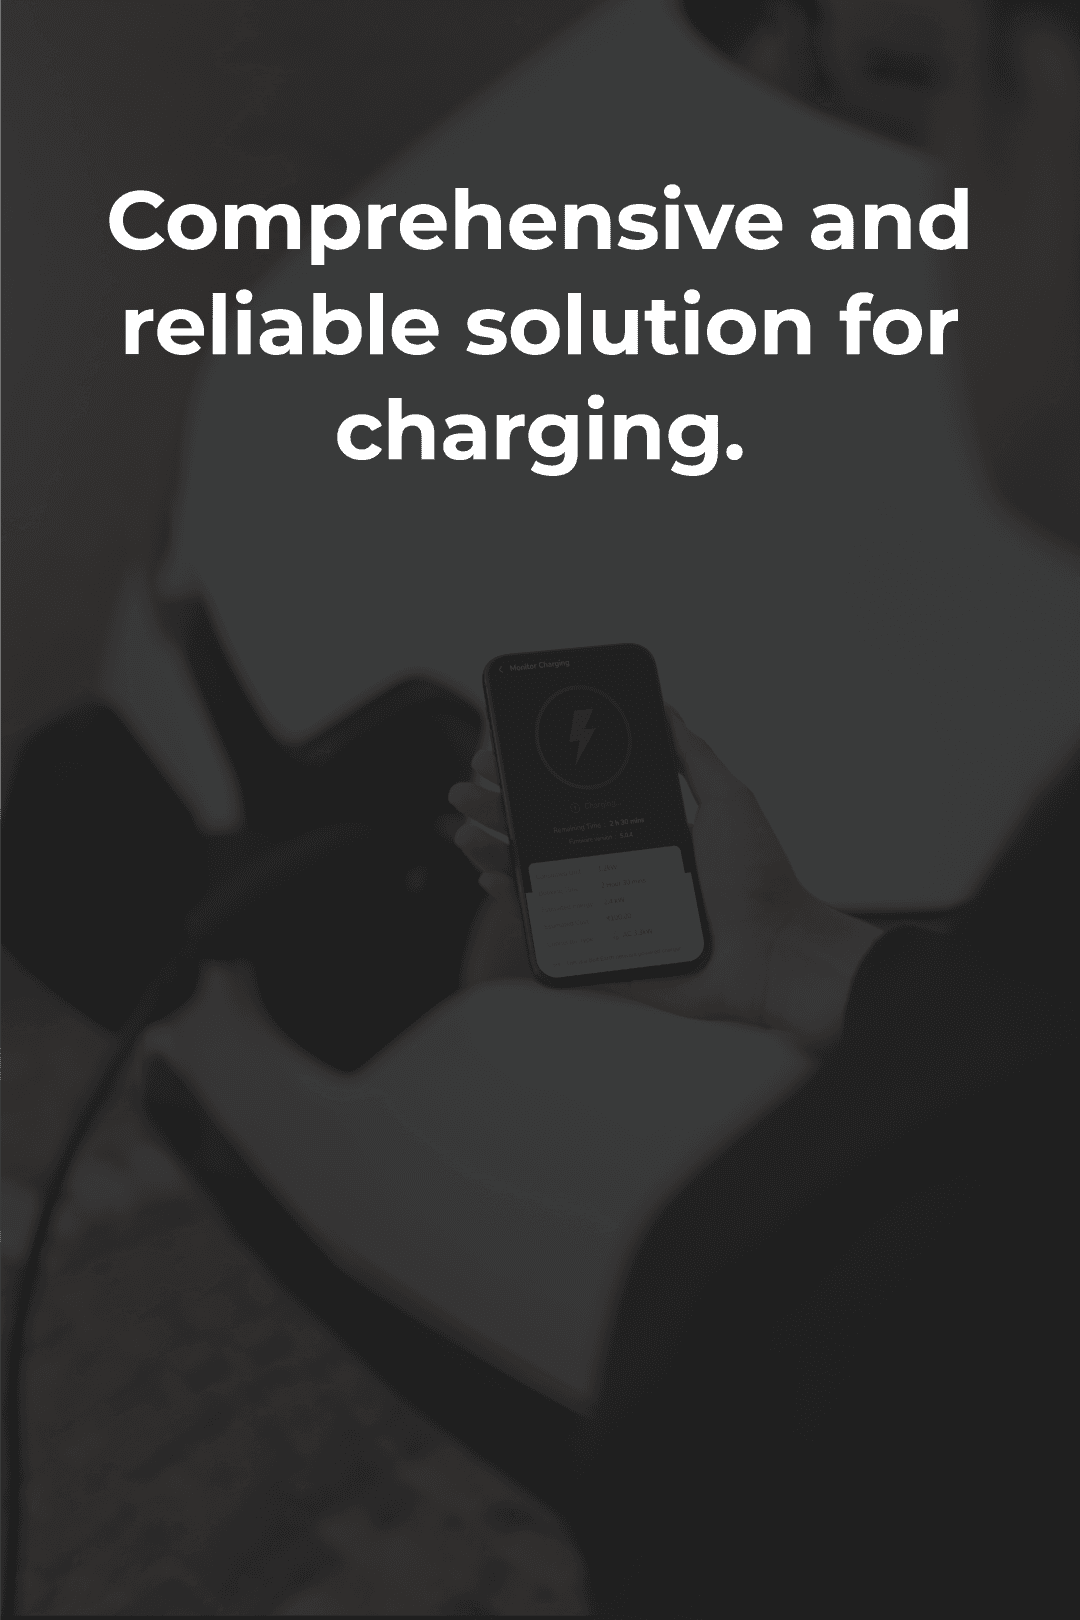 Comprehensive and reliable solution for charging.